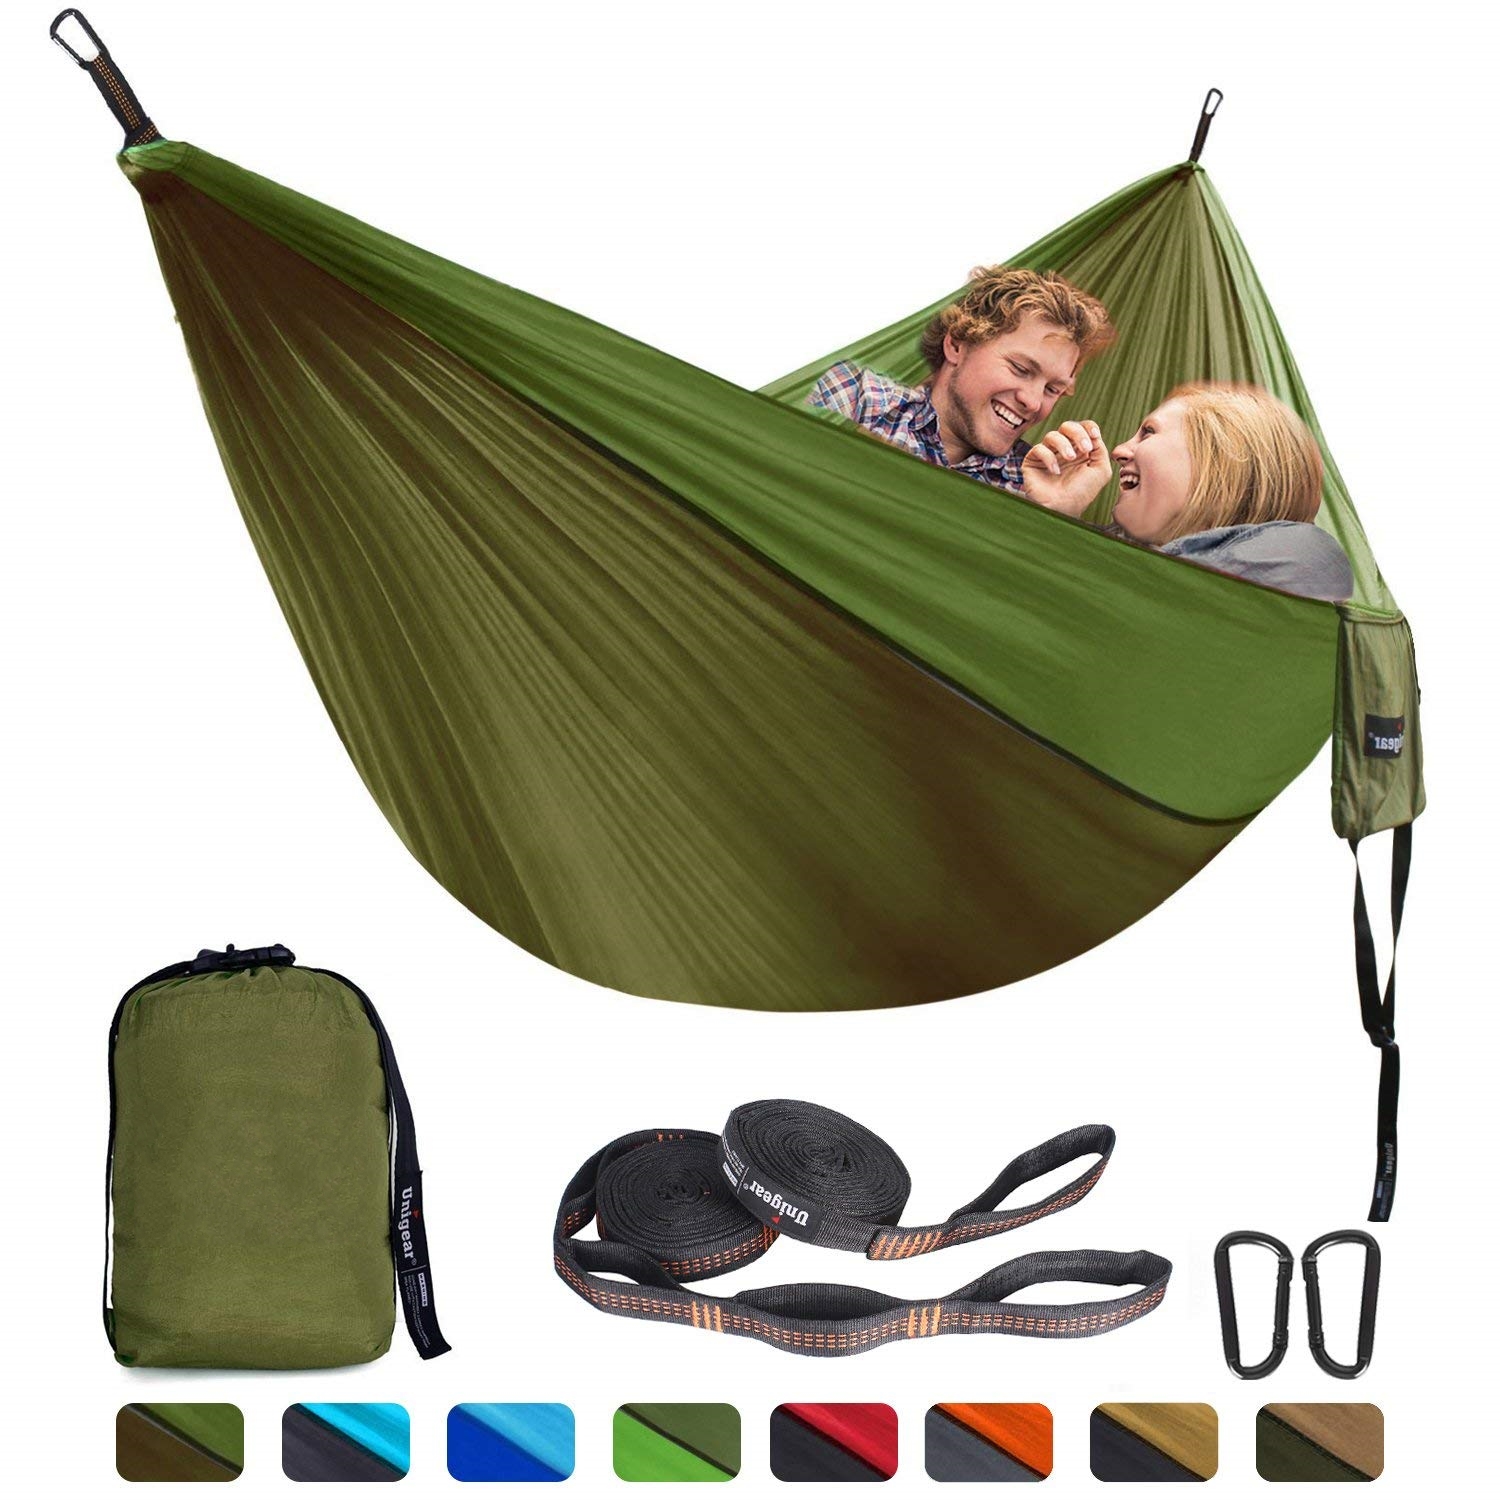 Single & Double Camping Hammock with 2 Tree StrapsLightweight Portable Parachute Nylon Hammock Set for Travel Backpacking,Beach,Yard and Outdoor Survival Silver Grey/Mint Green, Twin 